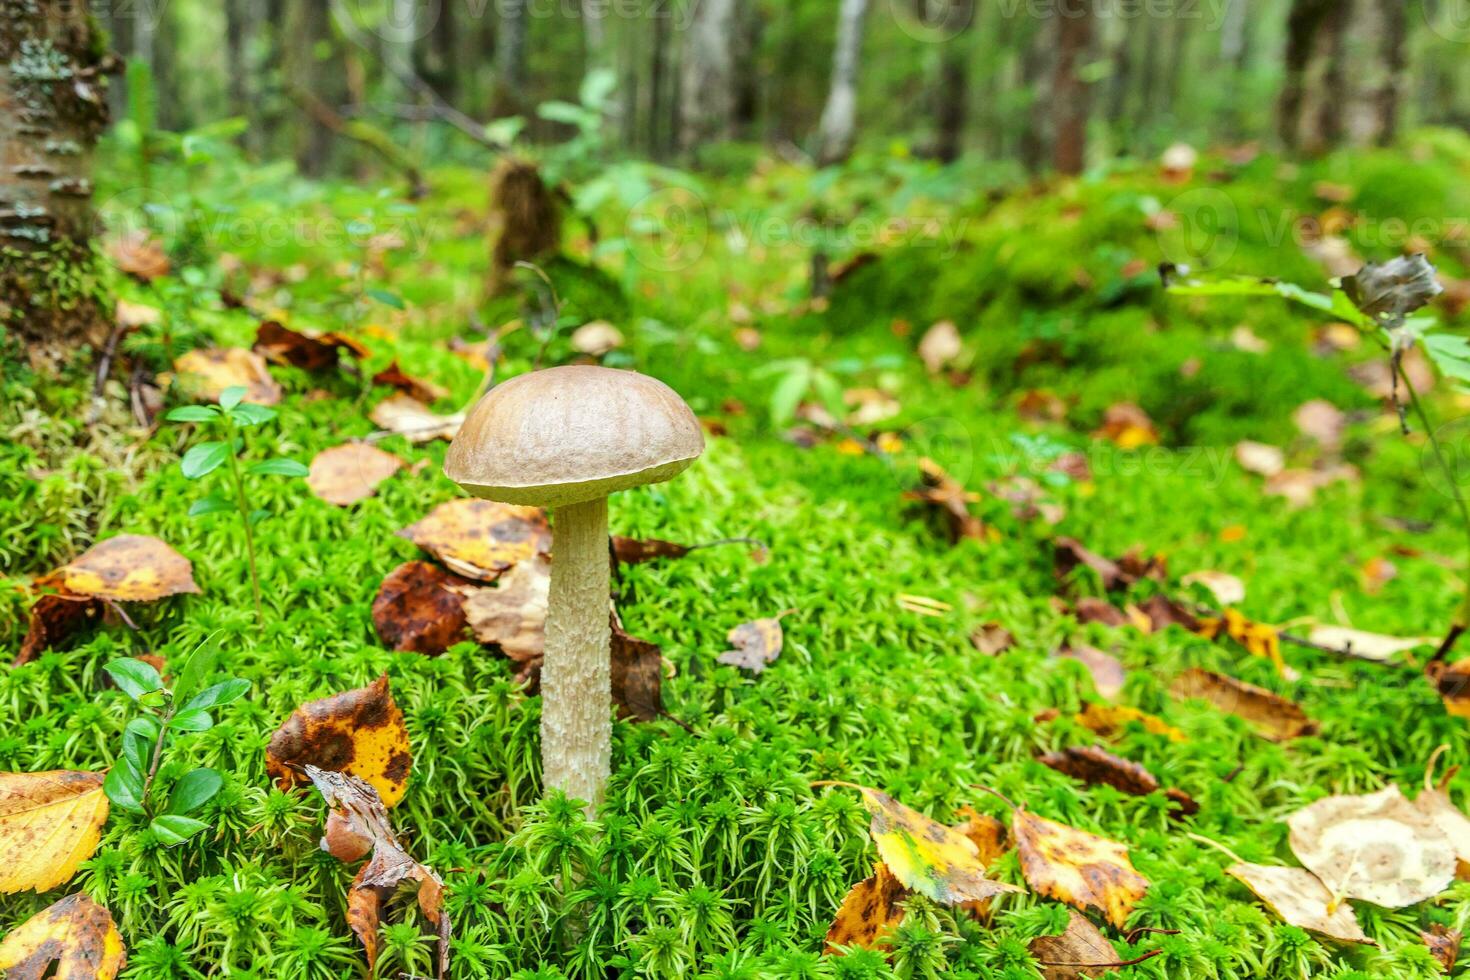 Edible small mushroom brown cap Penny Bun leccinum in moss autumn forest background. Fungus in the natural environment. Big mushroom macro close up. Inspirational natural summer or fall landscape. photo